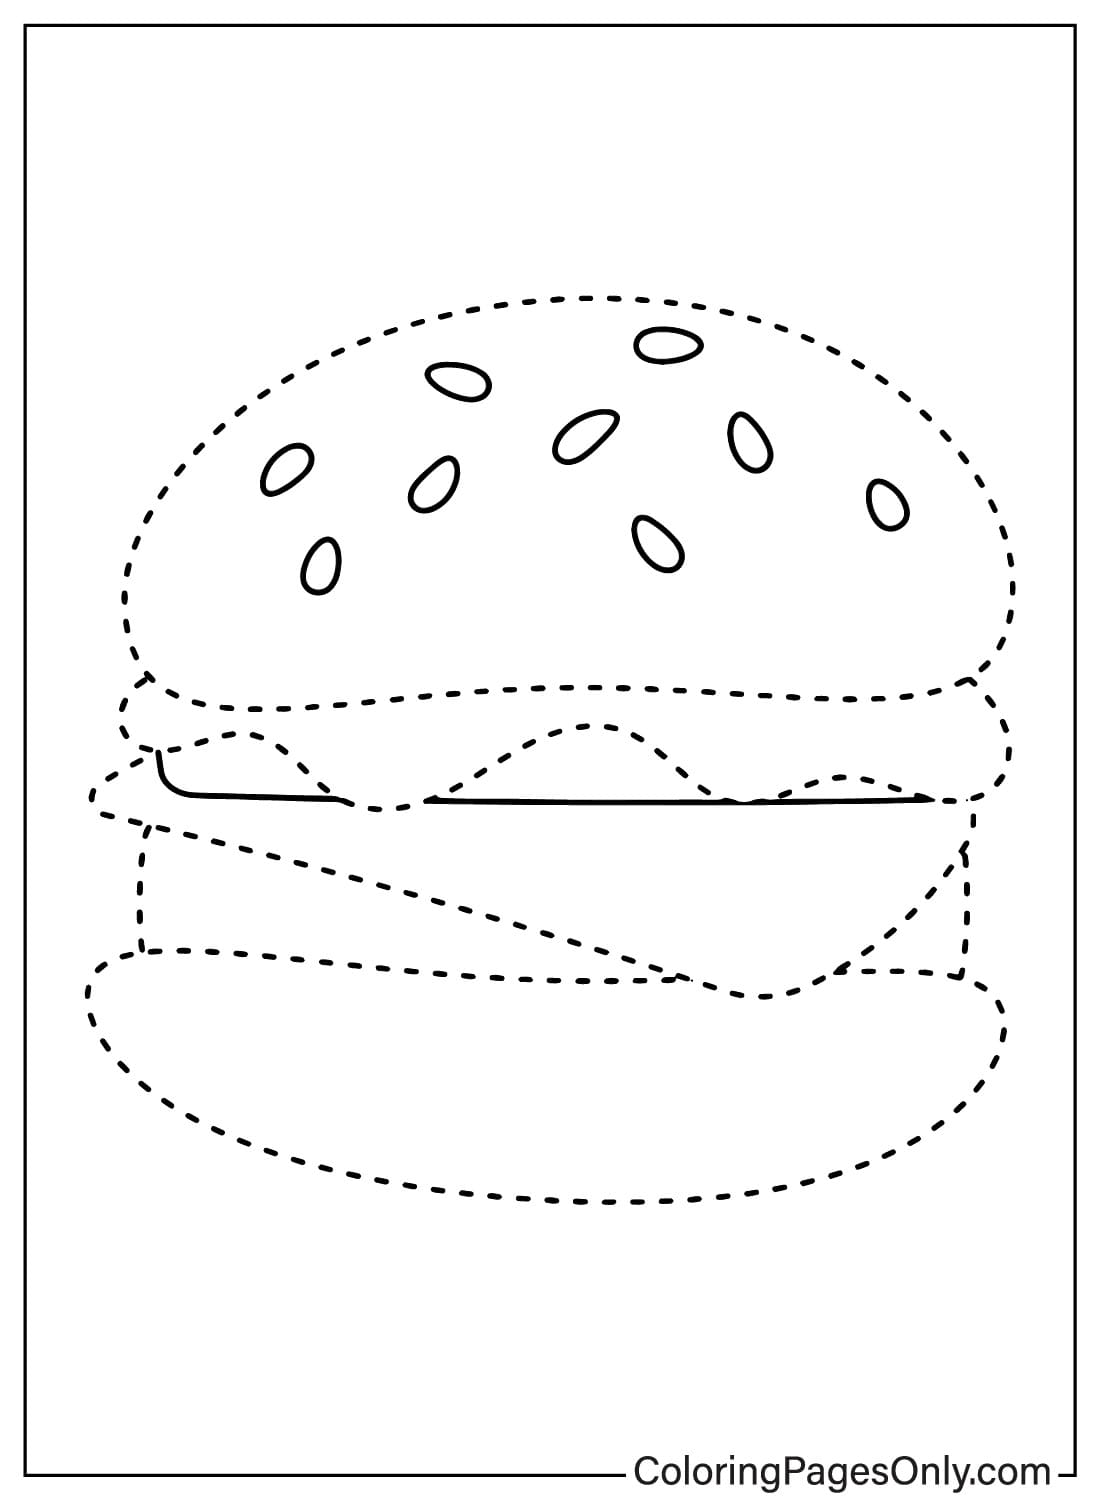 Tracing Coloring Page to Print from Tracing